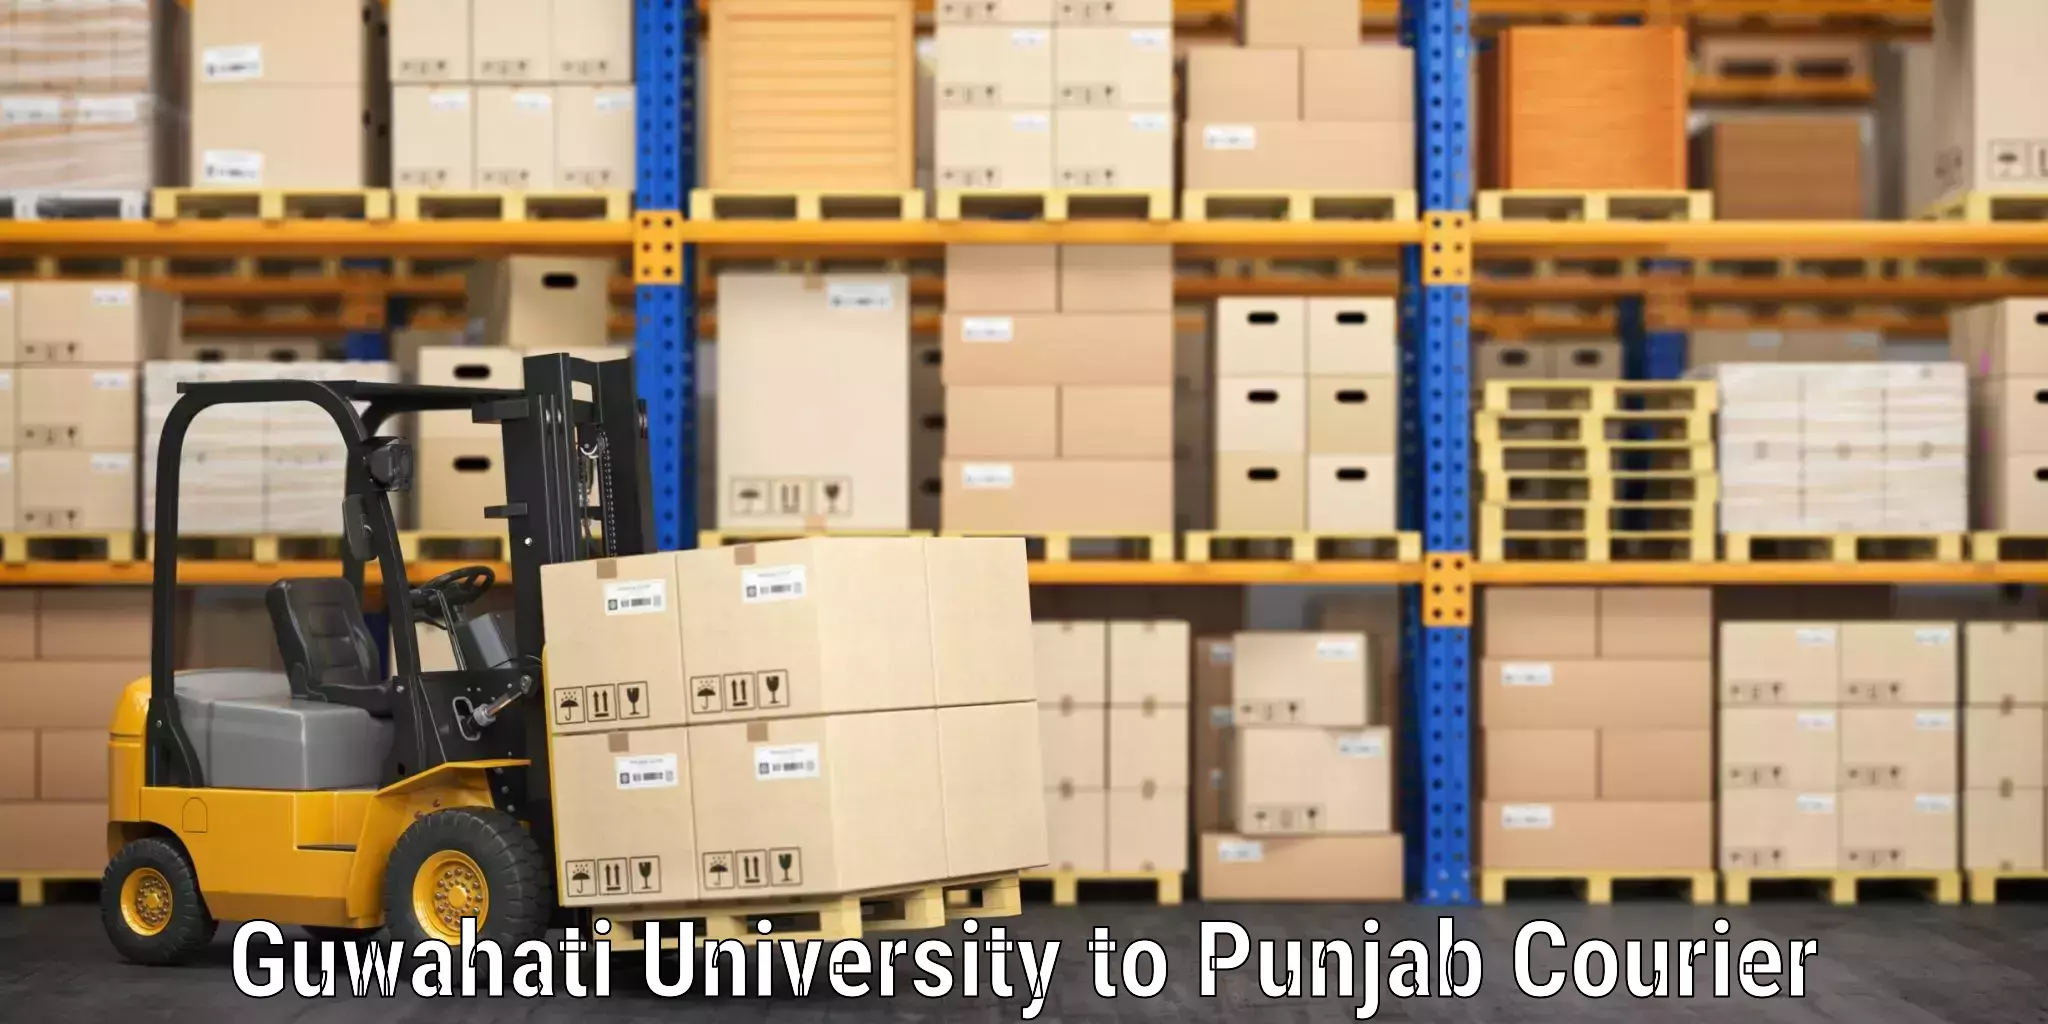 Baggage delivery support Guwahati University to Thapar Institute of Engineering and Technology Patiala